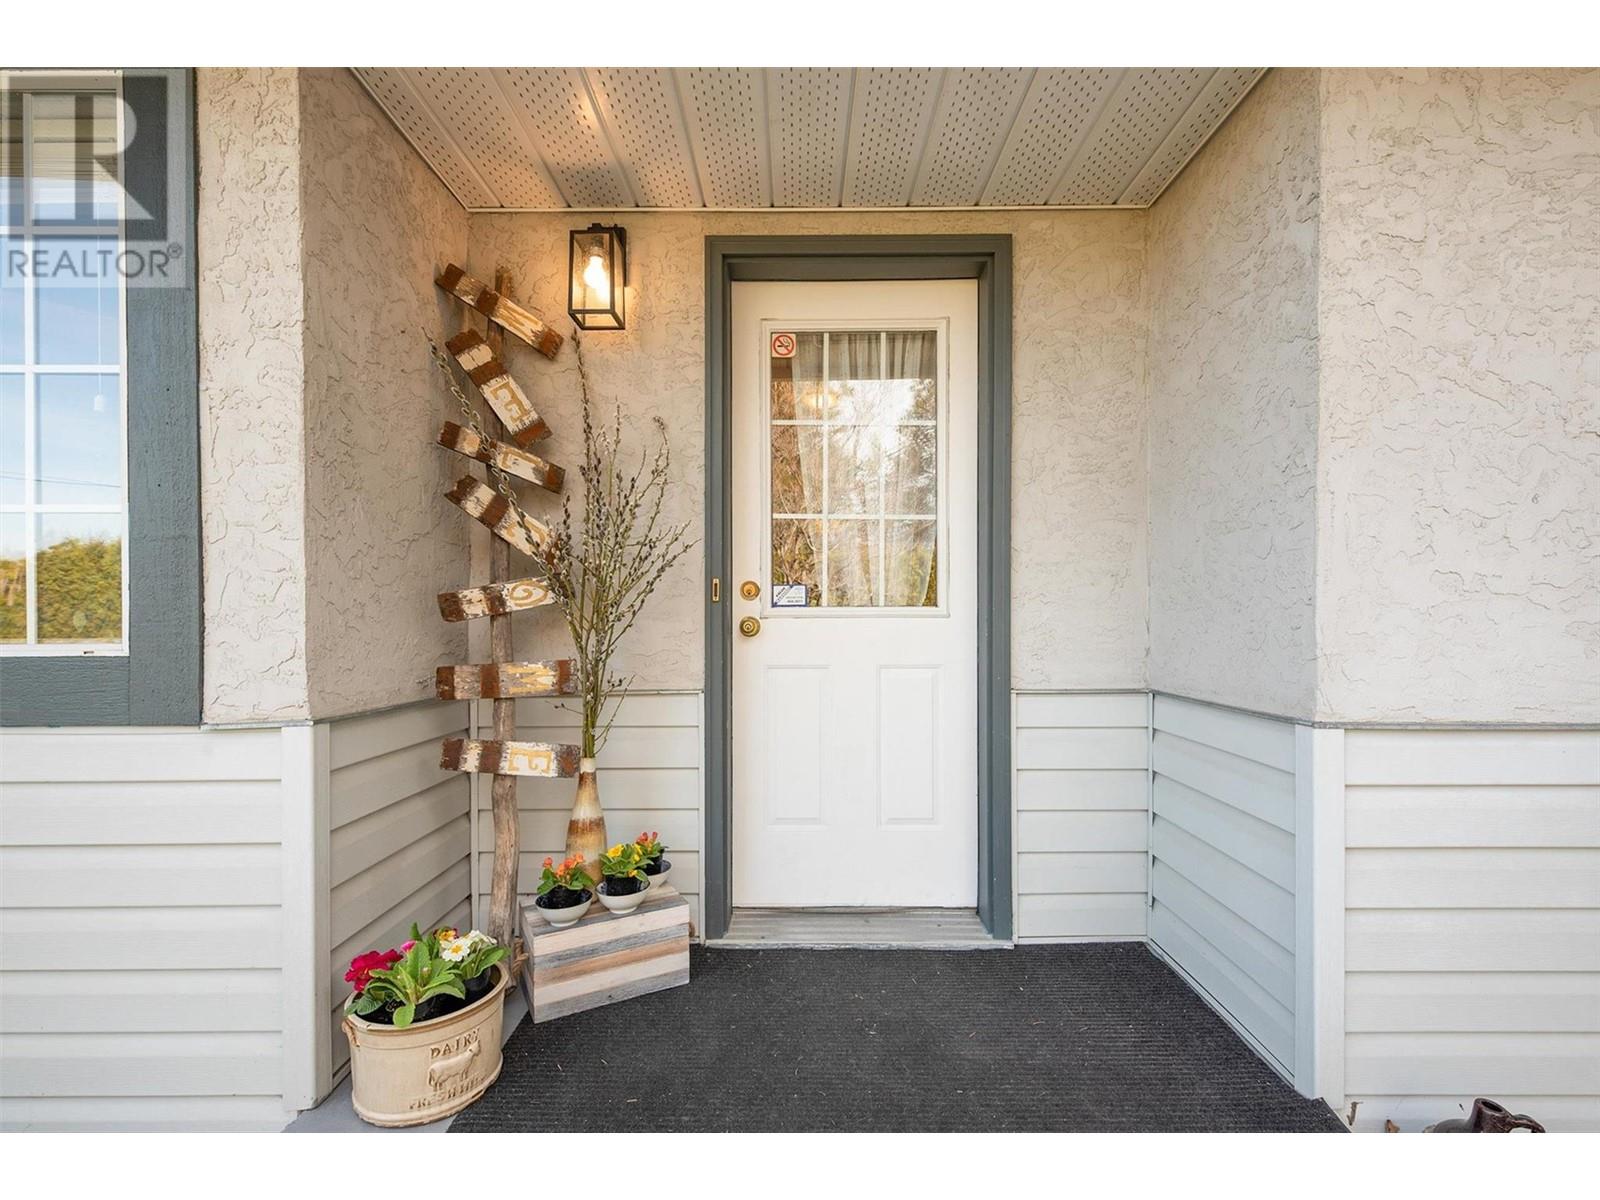  3542 Chives Place, West Kelowna